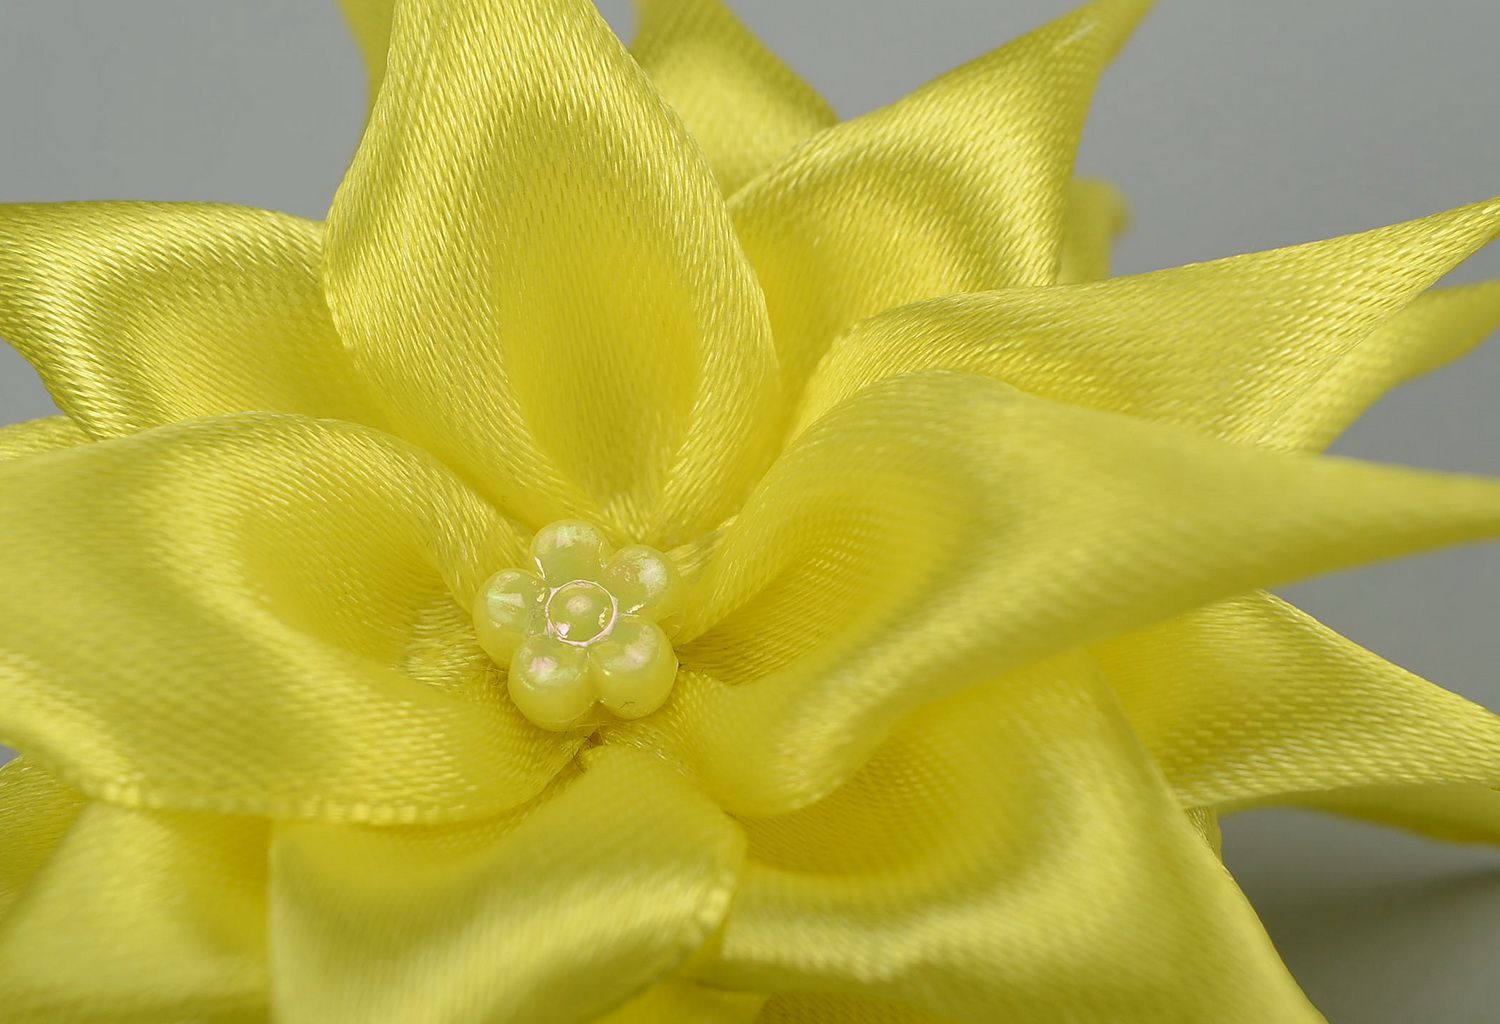 Scrunchy with a yellow satin flower photo 4